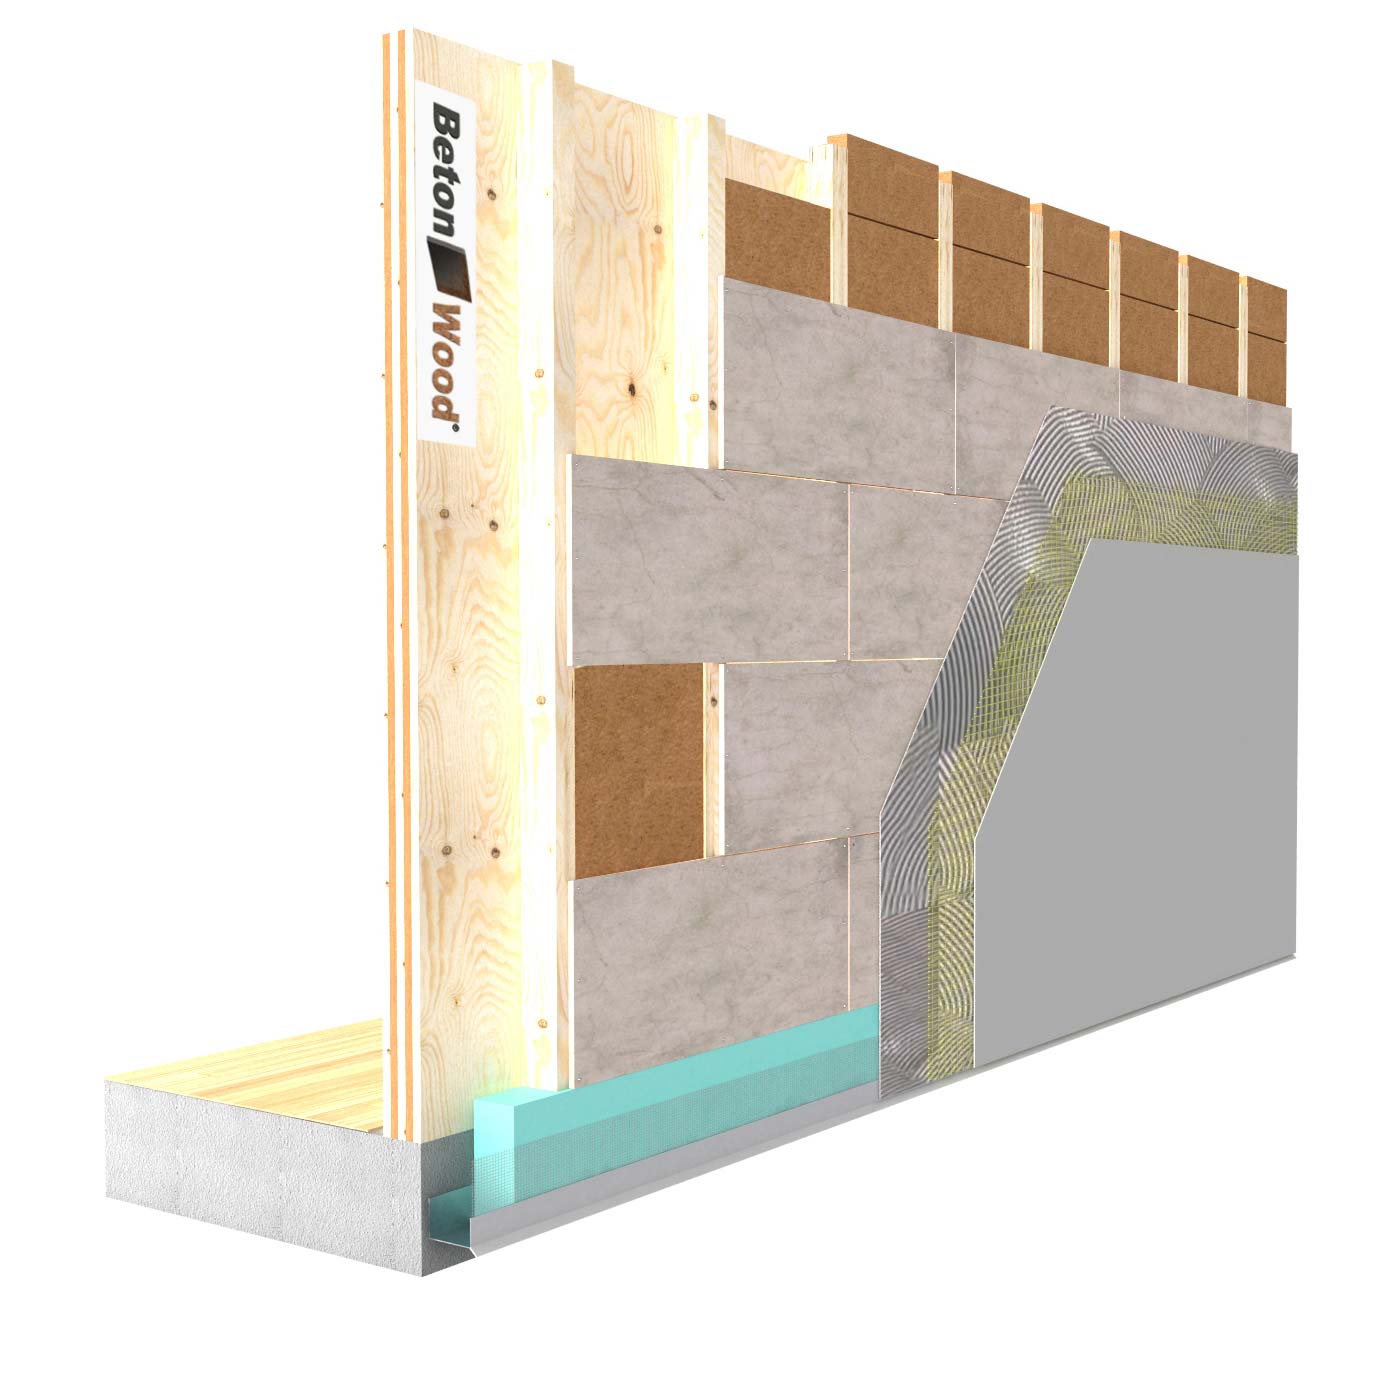 External insulation system with Protect dry fiber wood on wooden walls